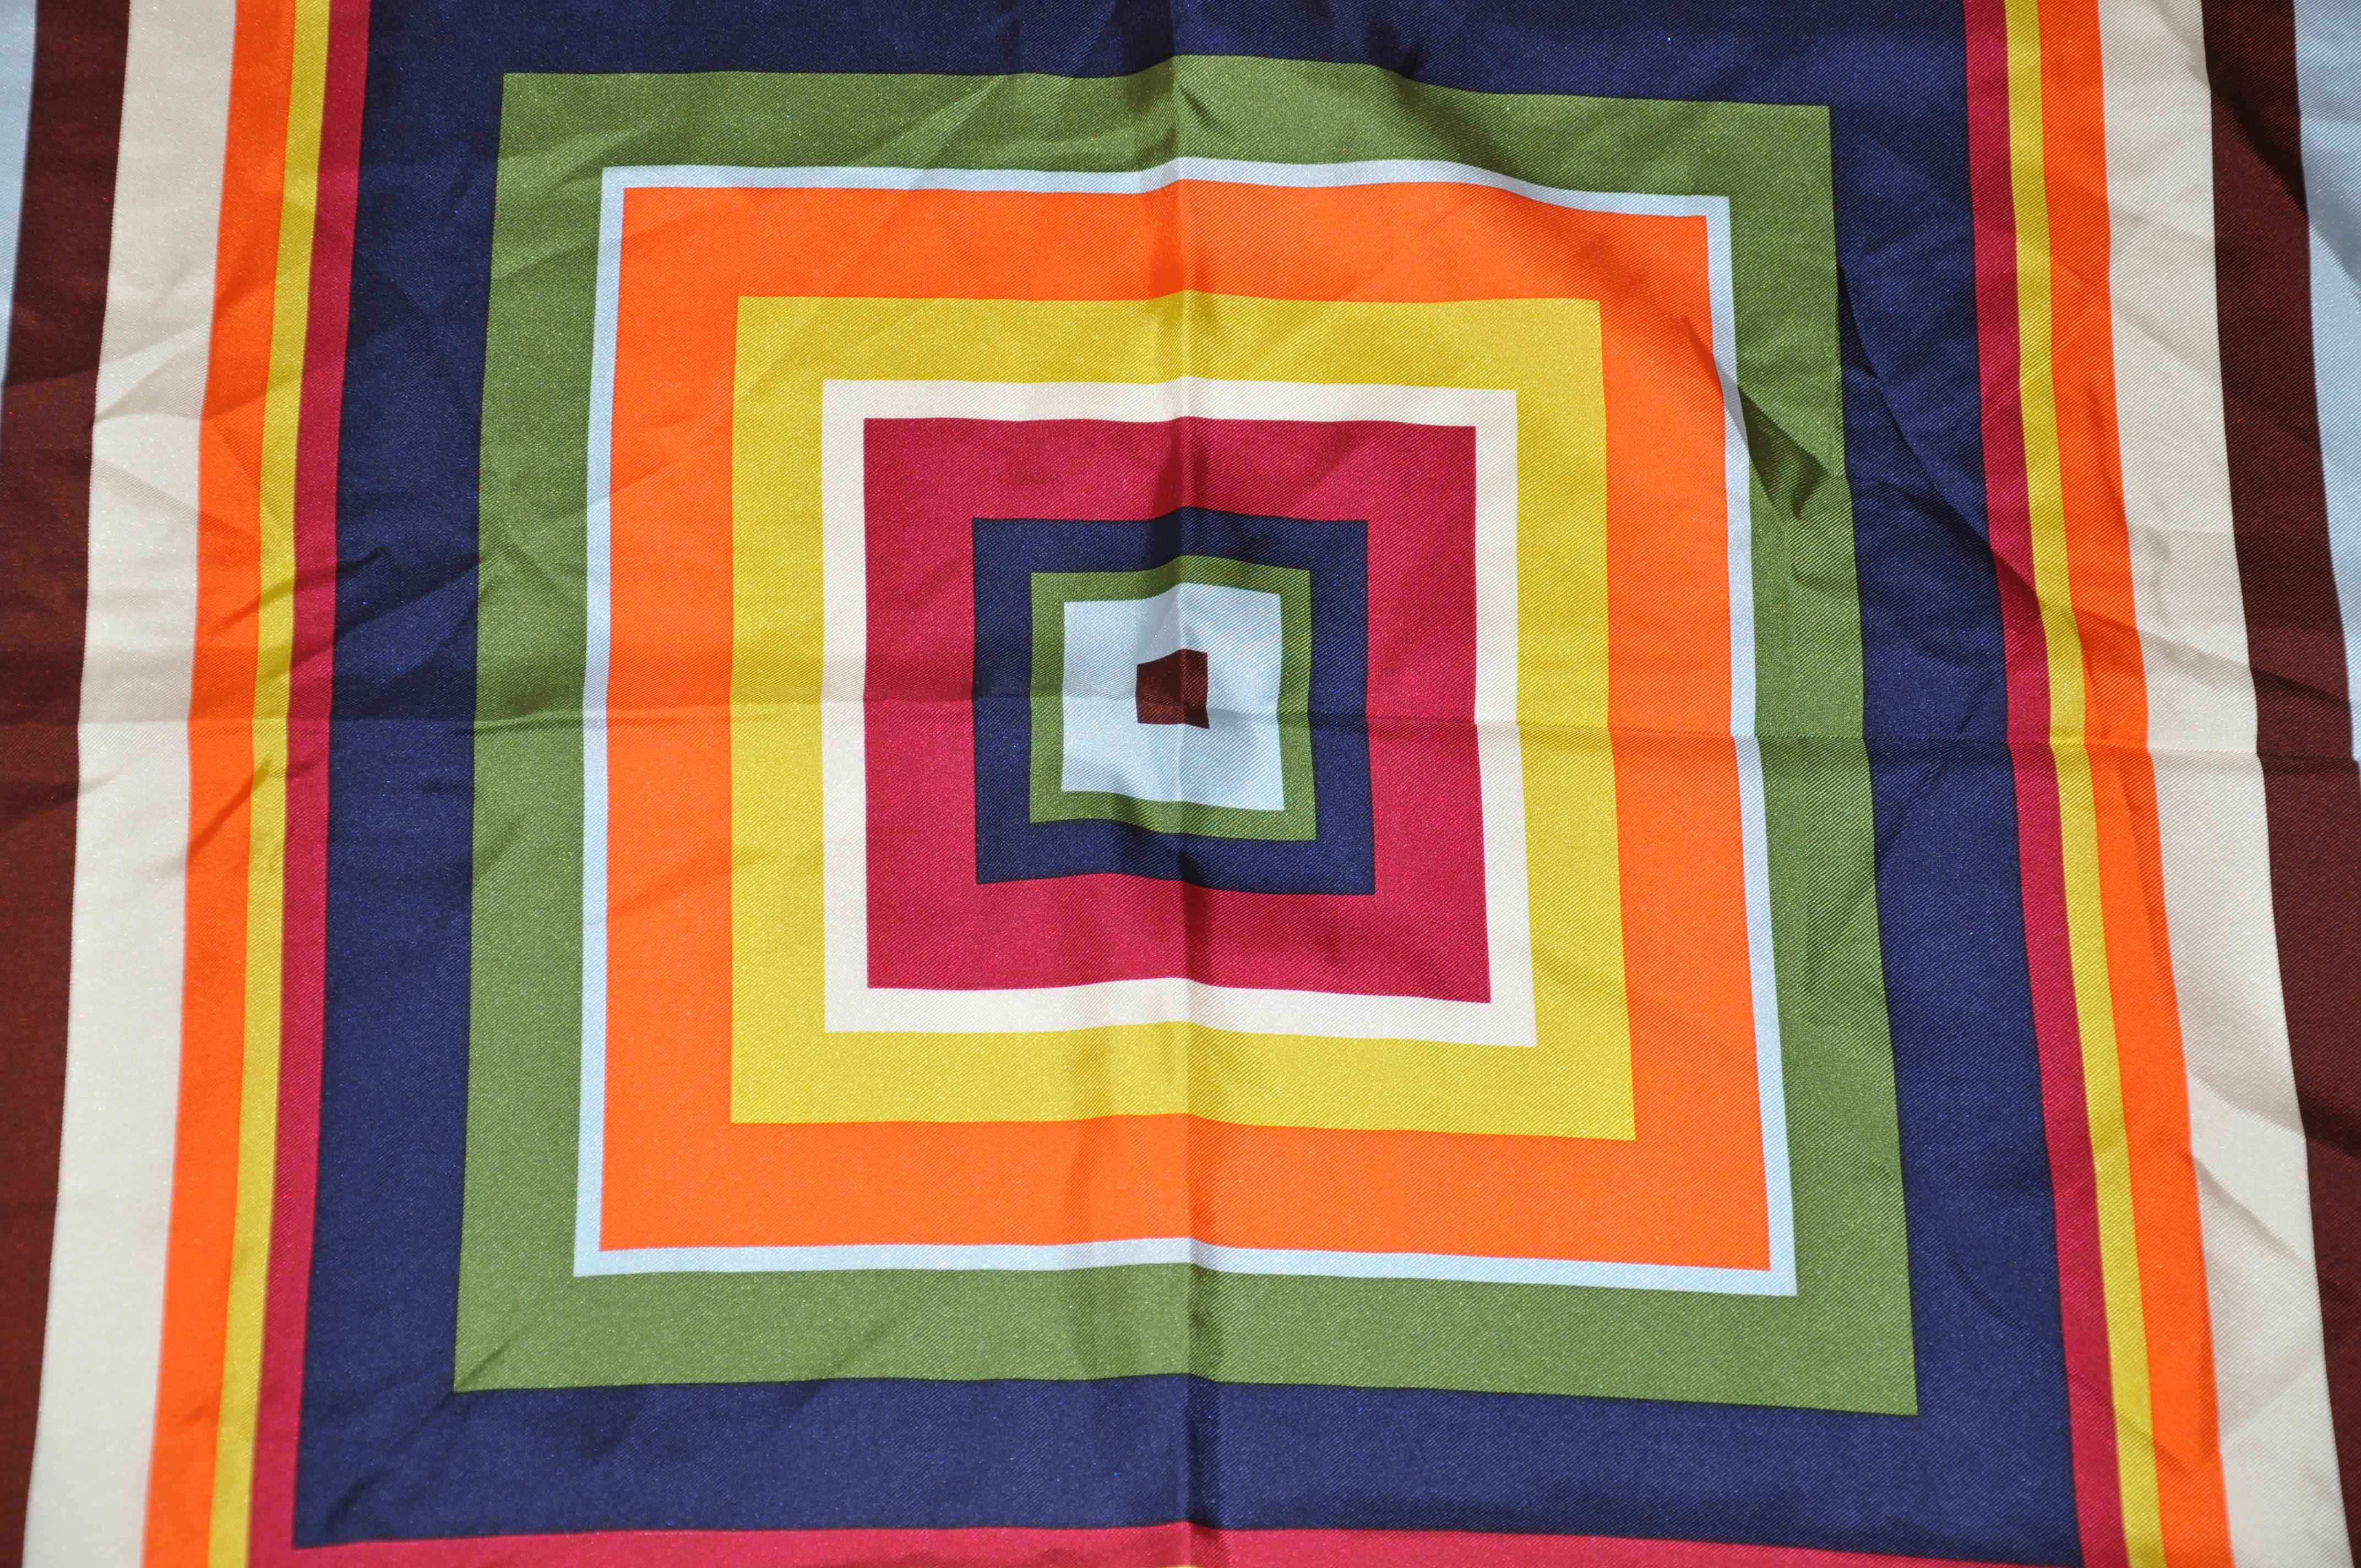 Coach vivid and colorful multicolor overlapping square silk scarf accented with hand-rolled edges, measures 26 inches by 27 inches. Made in China.